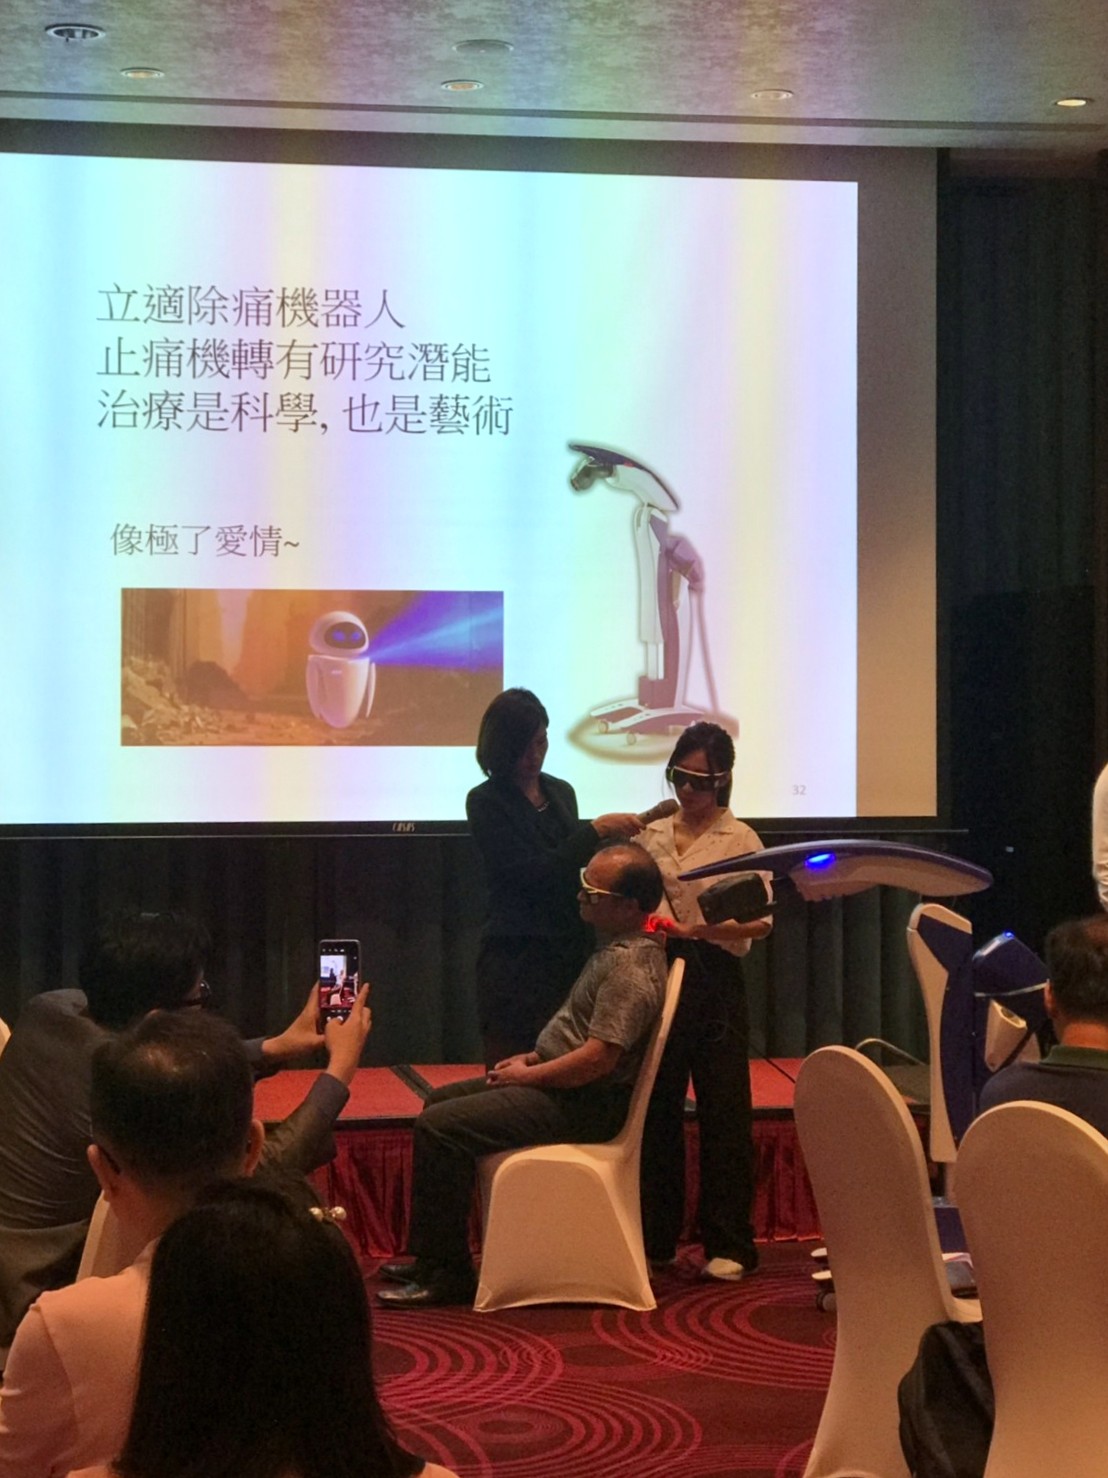 Taiwan - Workshop on M6 laser device, August 2020